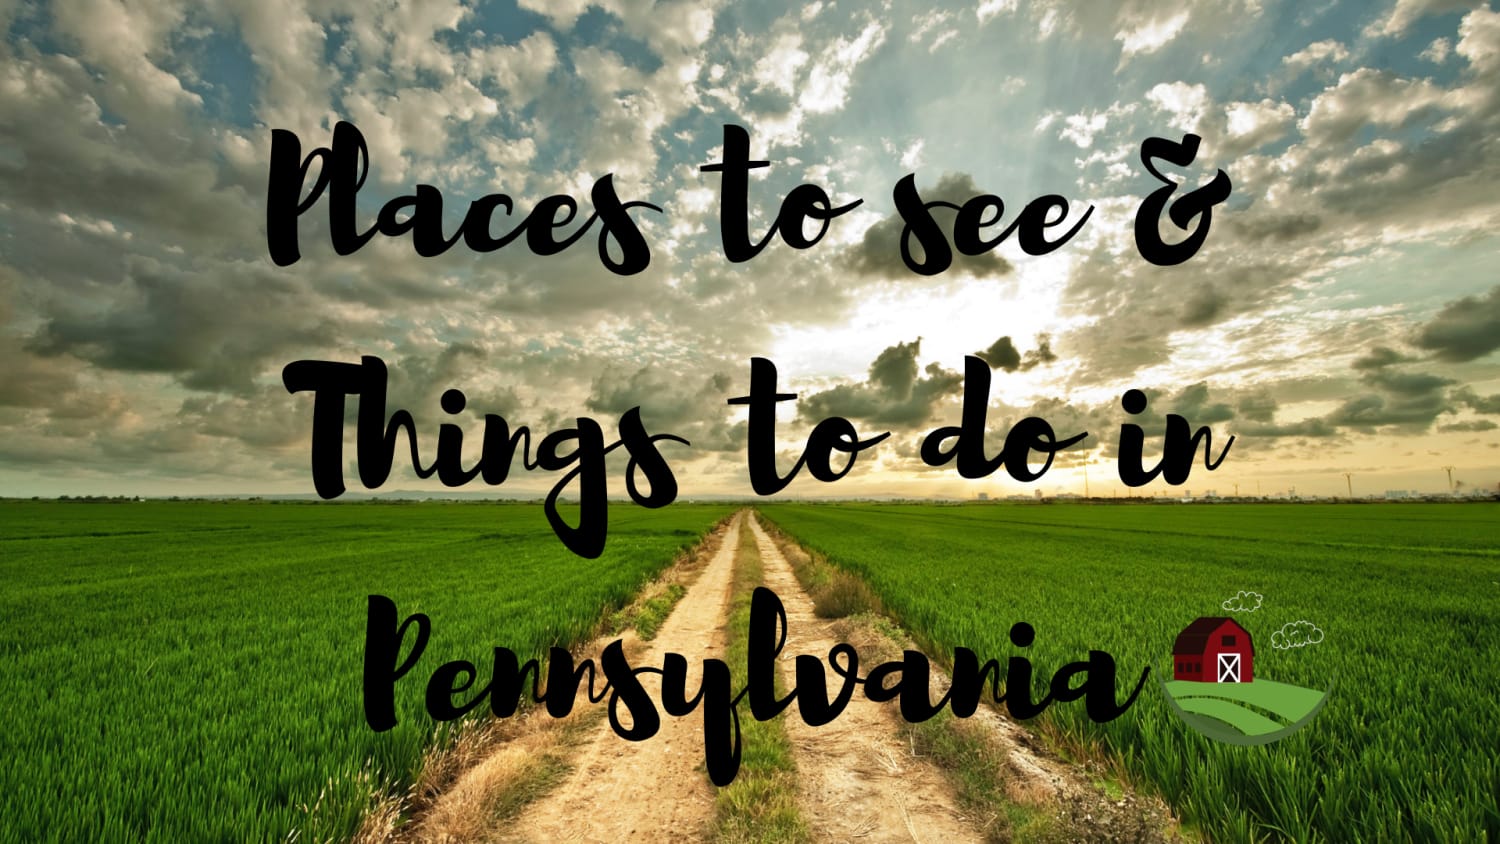 Places to See & Things to do in Pennsylvania